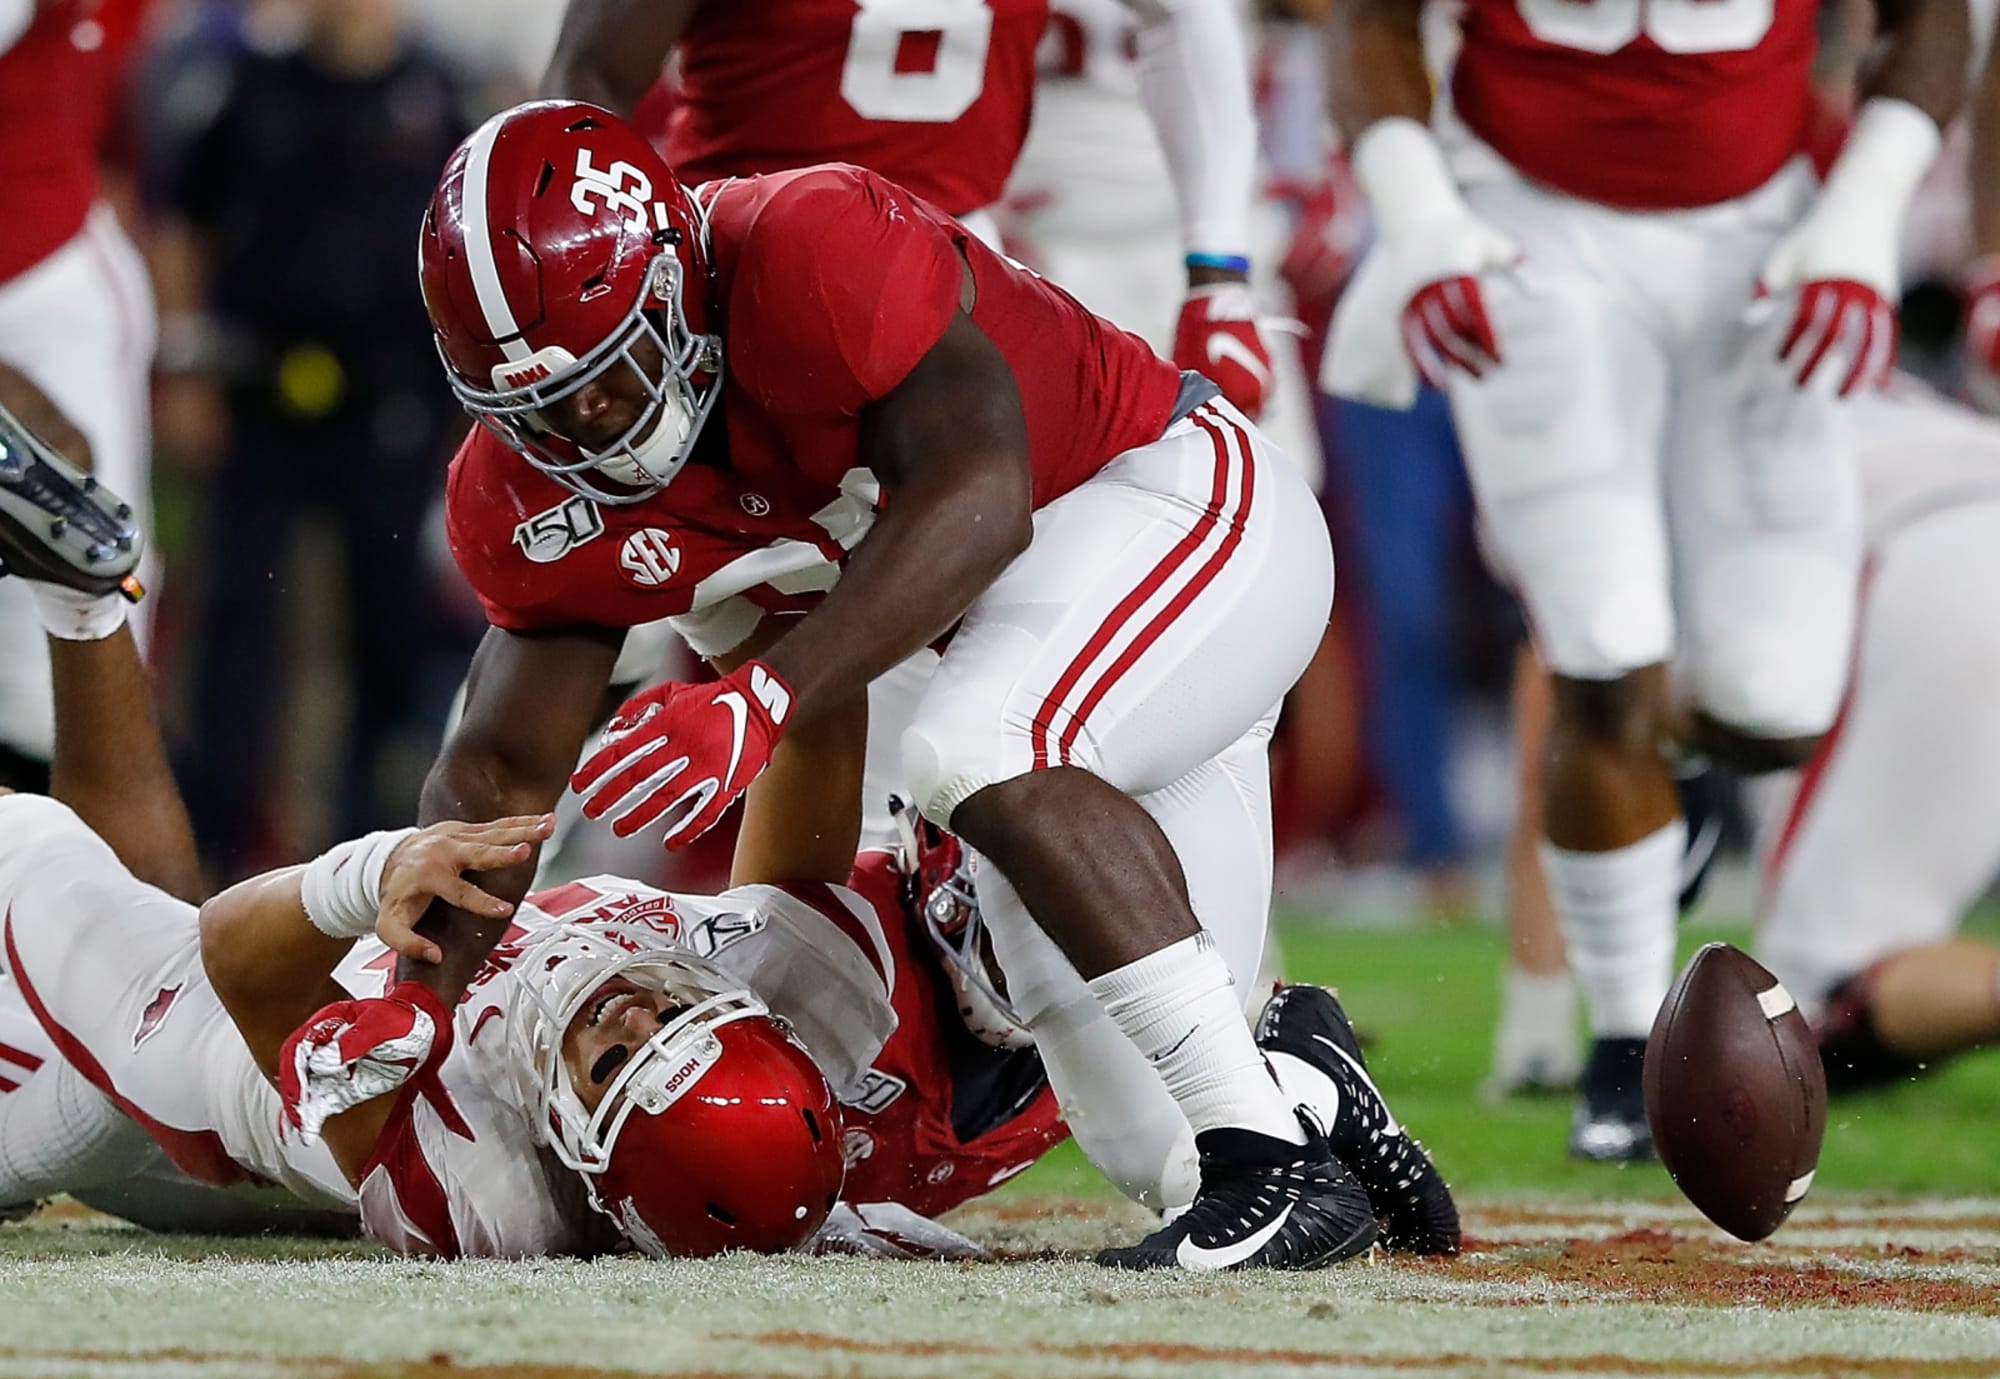 Shane Lee played better than we think for Alabama football in 2019